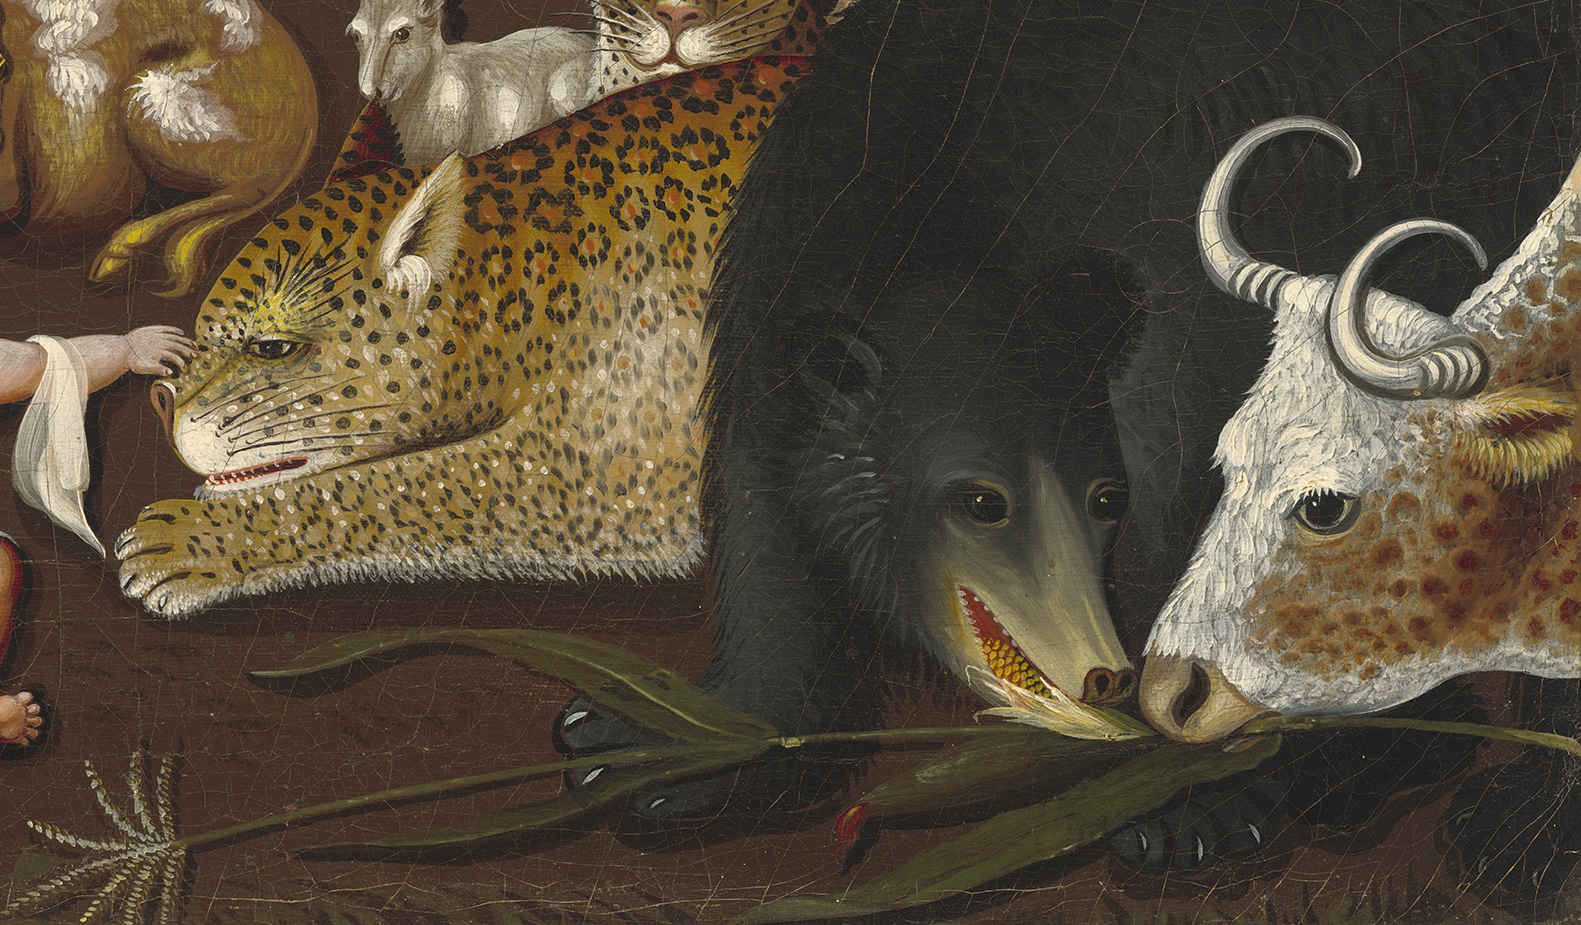 The Peaceable Kingdom (detail) by Edward Hicks